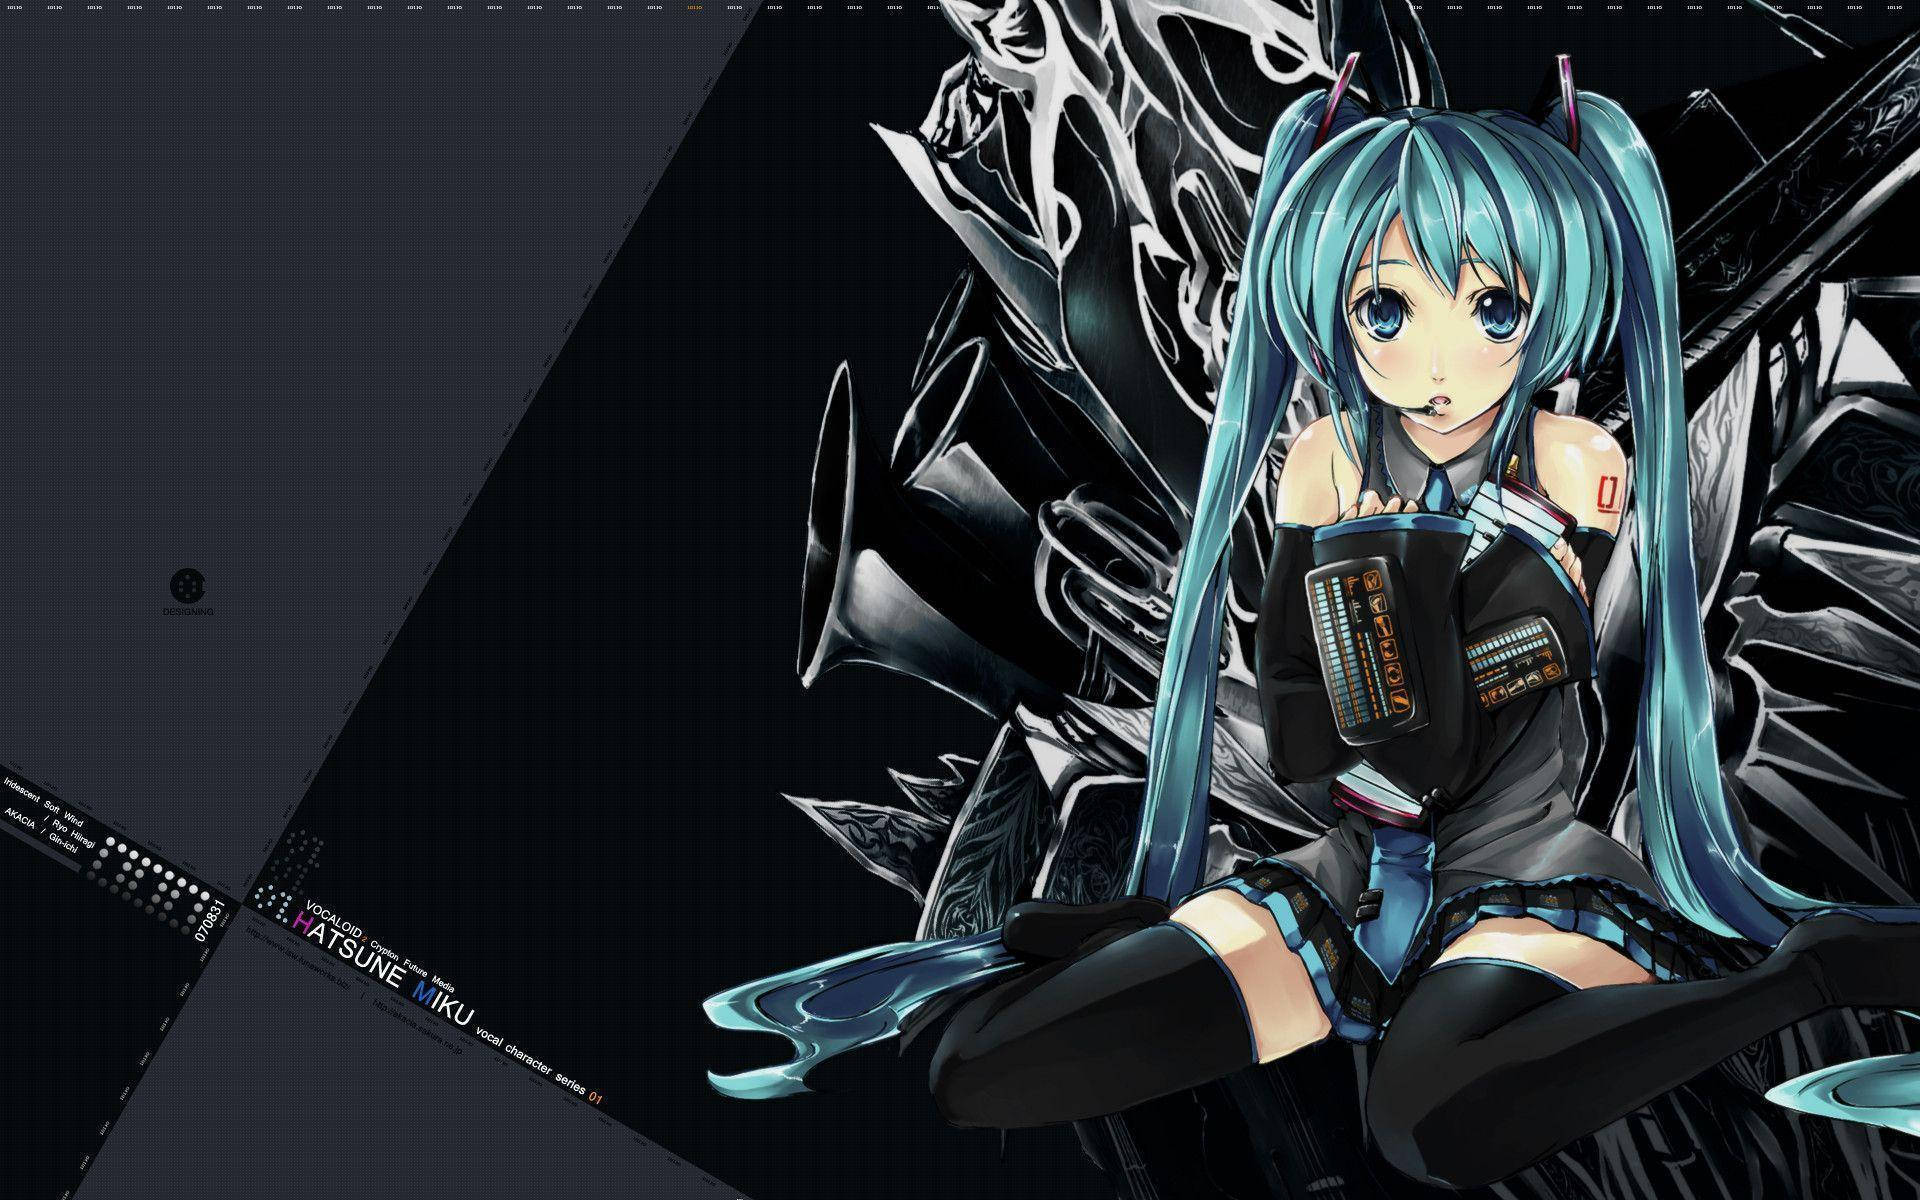 vocaloid characters wallpaper hd